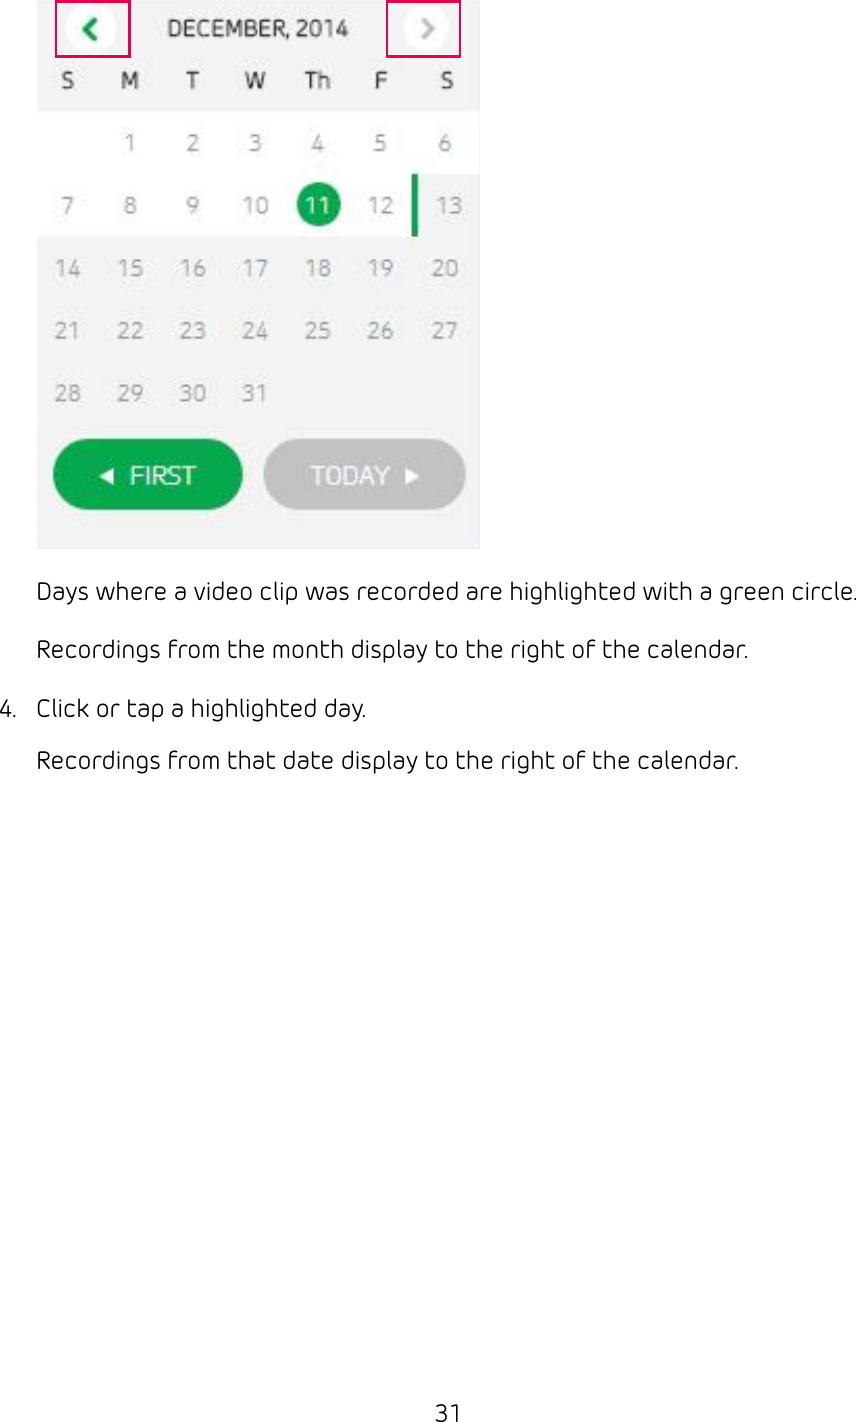 31Days where a video clip was recorded are highlighted with a green circle.Recordings from the month display to the right of the calendar.4.  Click or tap a highlighted day.Recordings from that date display to the right of the calendar.